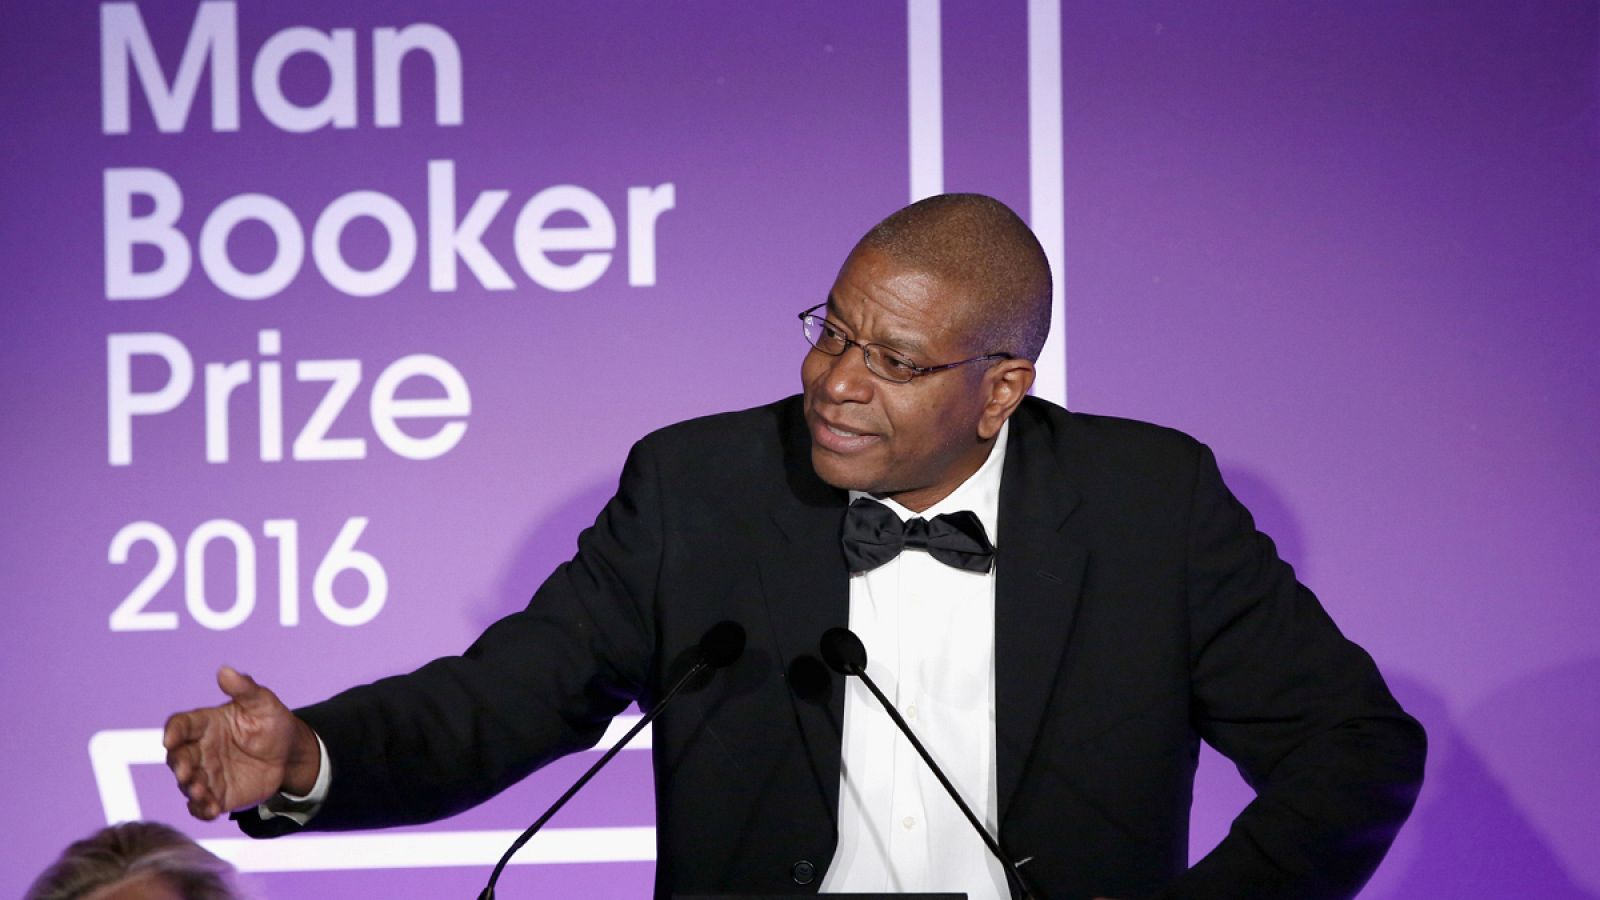 Winner of the 2016 Man Booker Prize for his novel 'The Sellout', Paul Beatty speaks on stage at the 2016 Man Booker Prize at The Guildhall